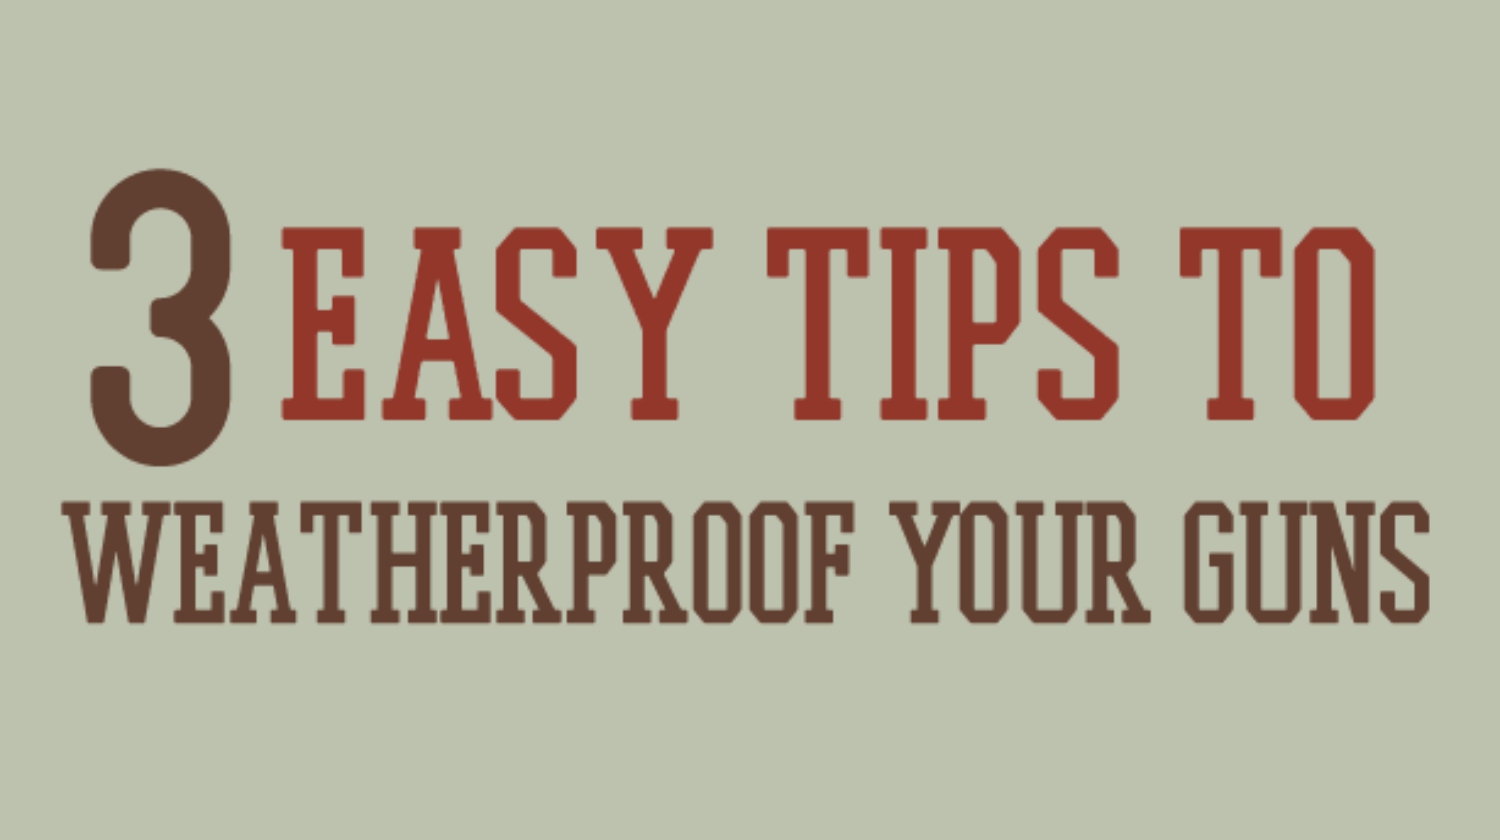 3 easy tips | Easy Tips To Weatherproof Your Guns | weatherproof your guns | wet rifle | Featured